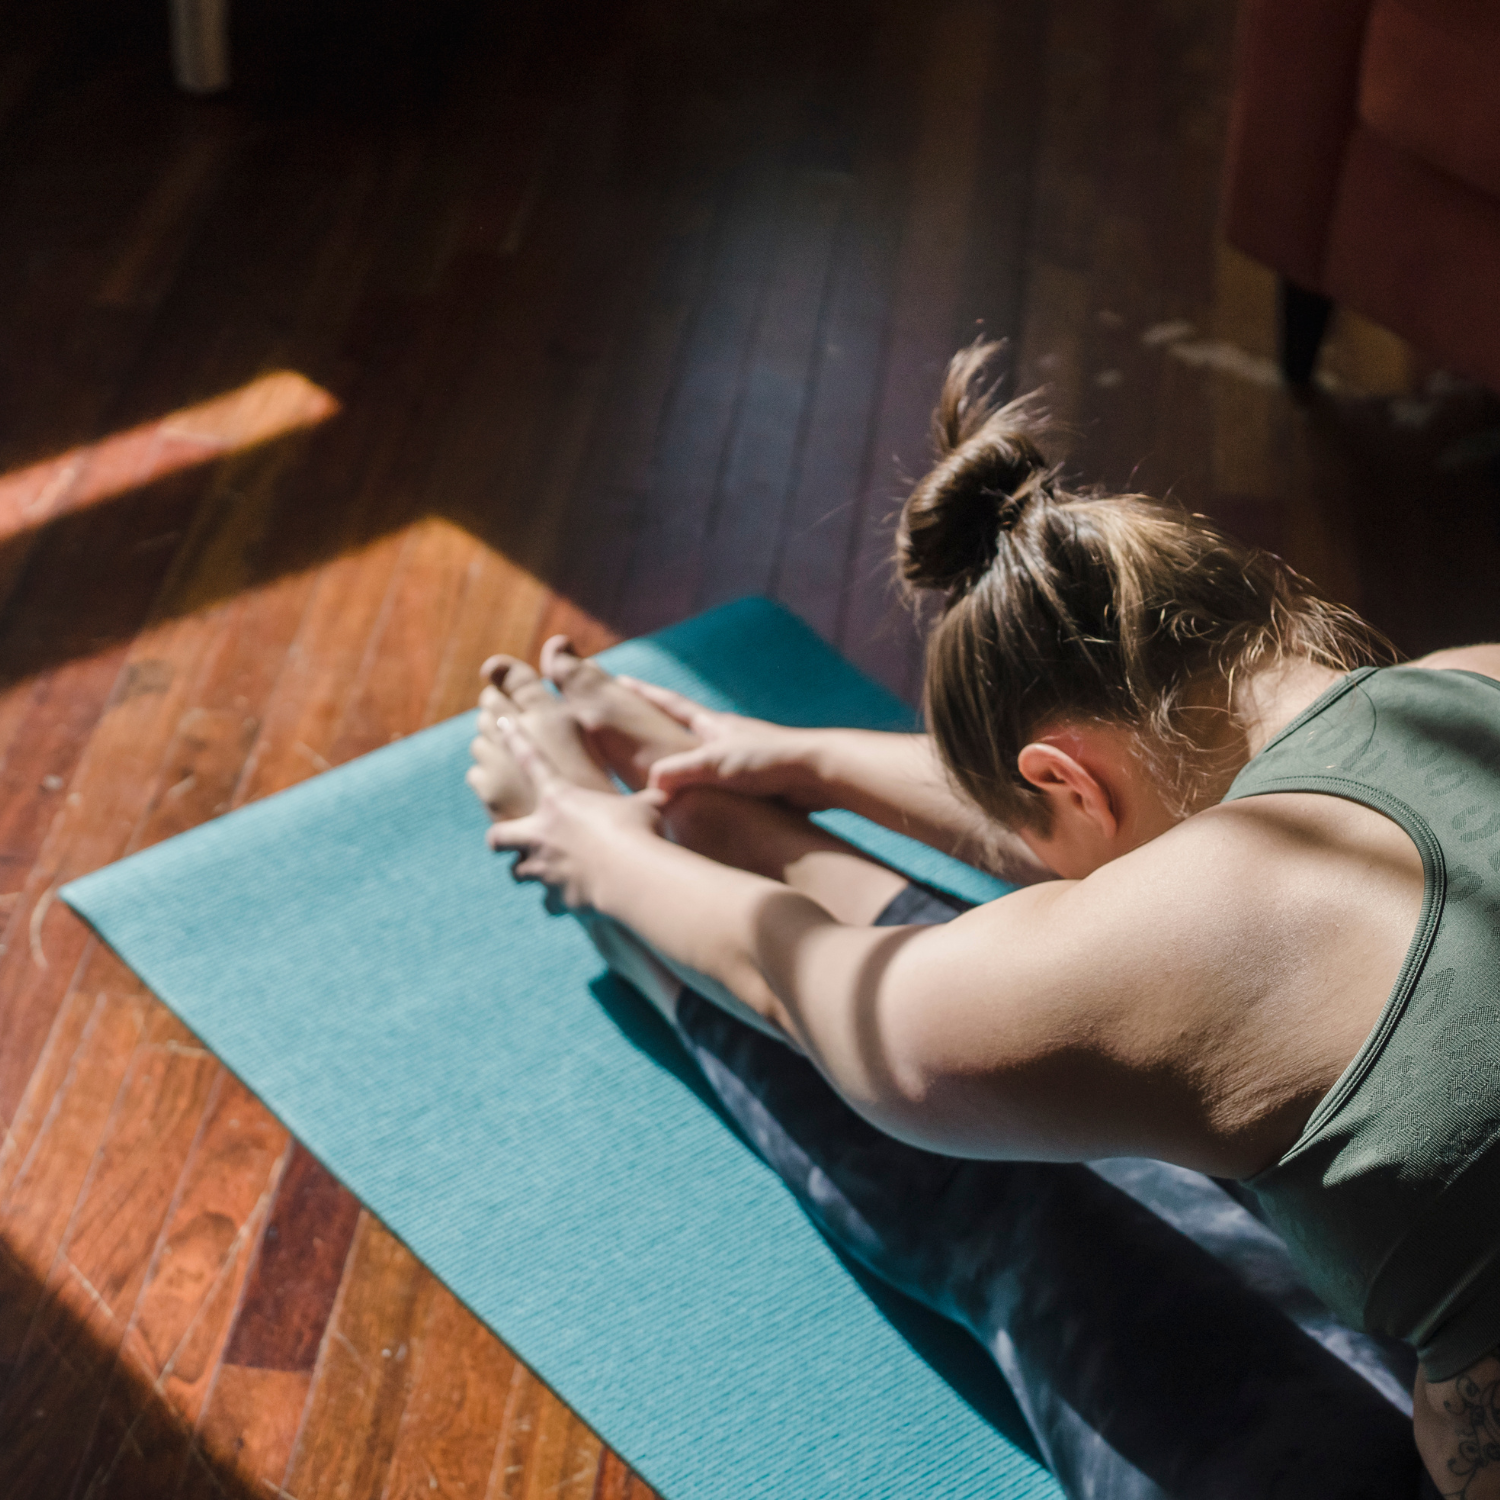 A picture of a person sitting on a yoga mat, stretching